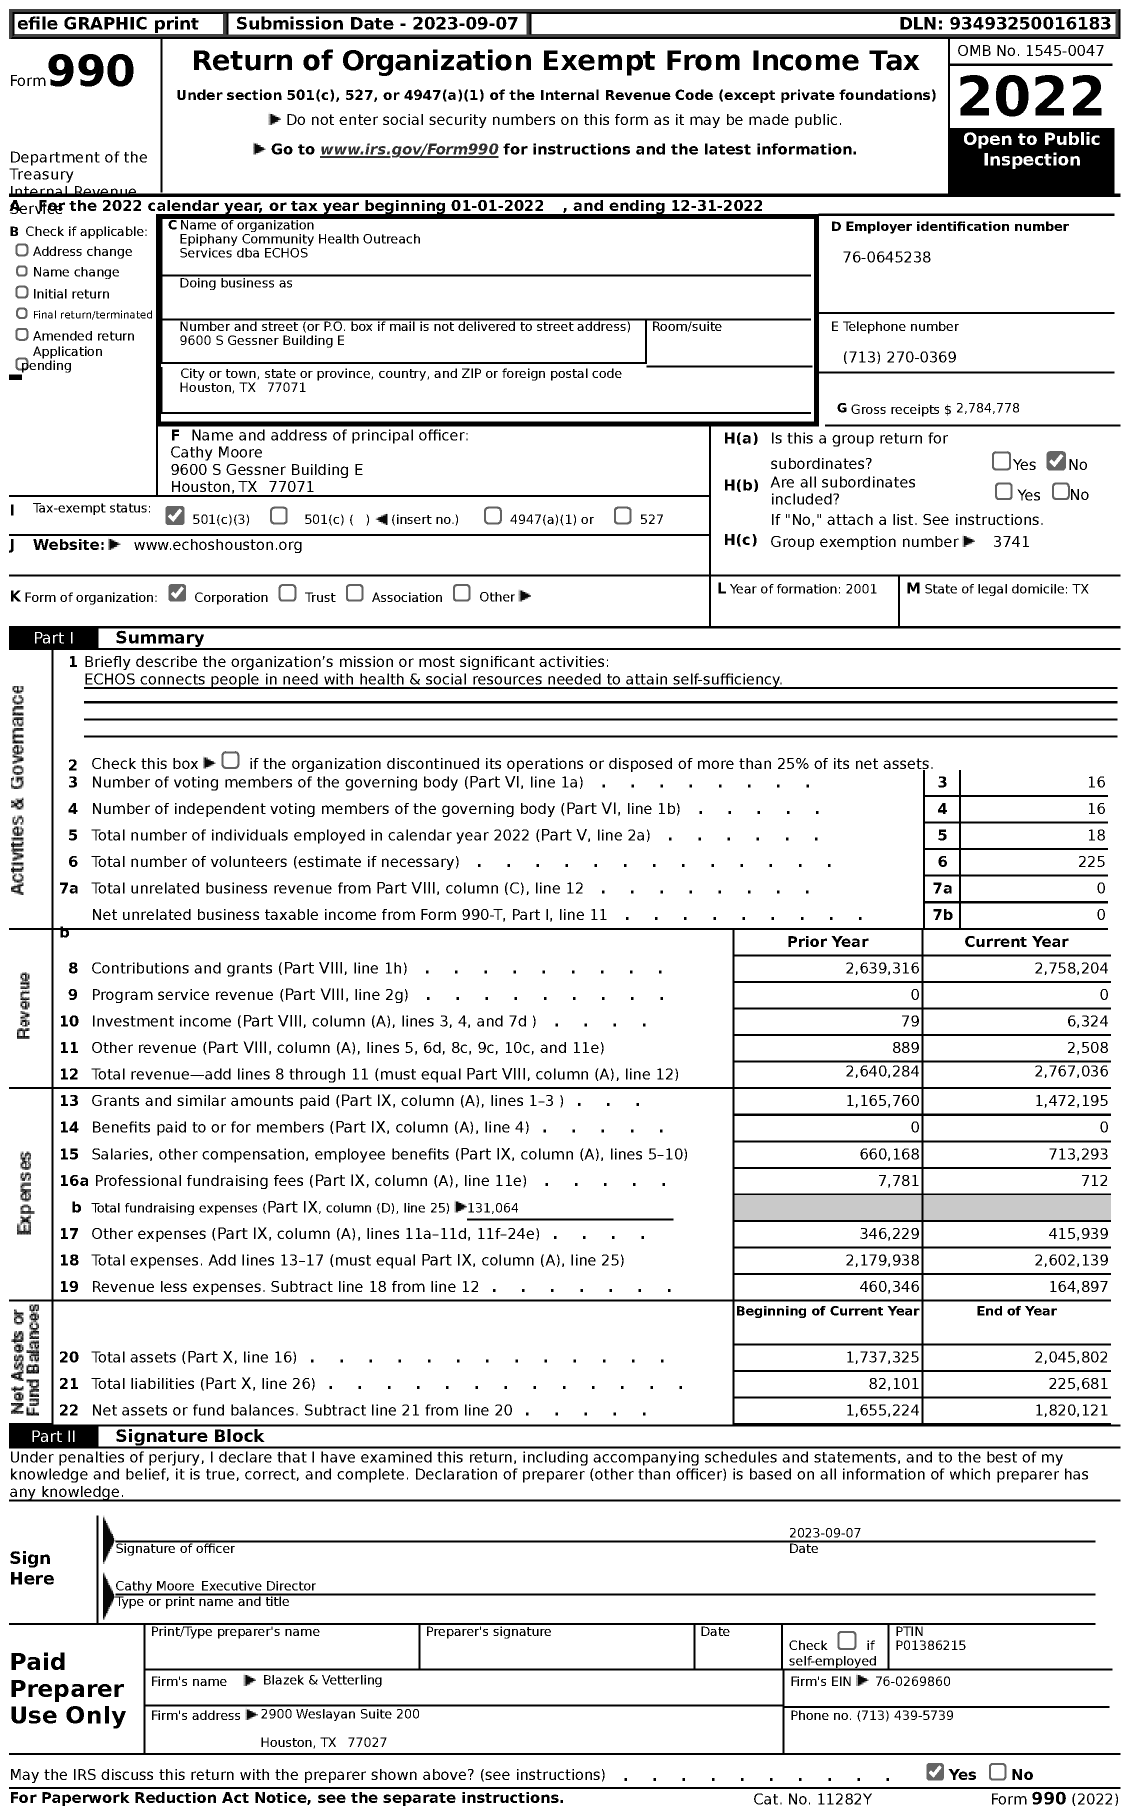 Image of first page of 2022 Form 990 for Epiphany Community Health Outreach Services dba (ECHOS)